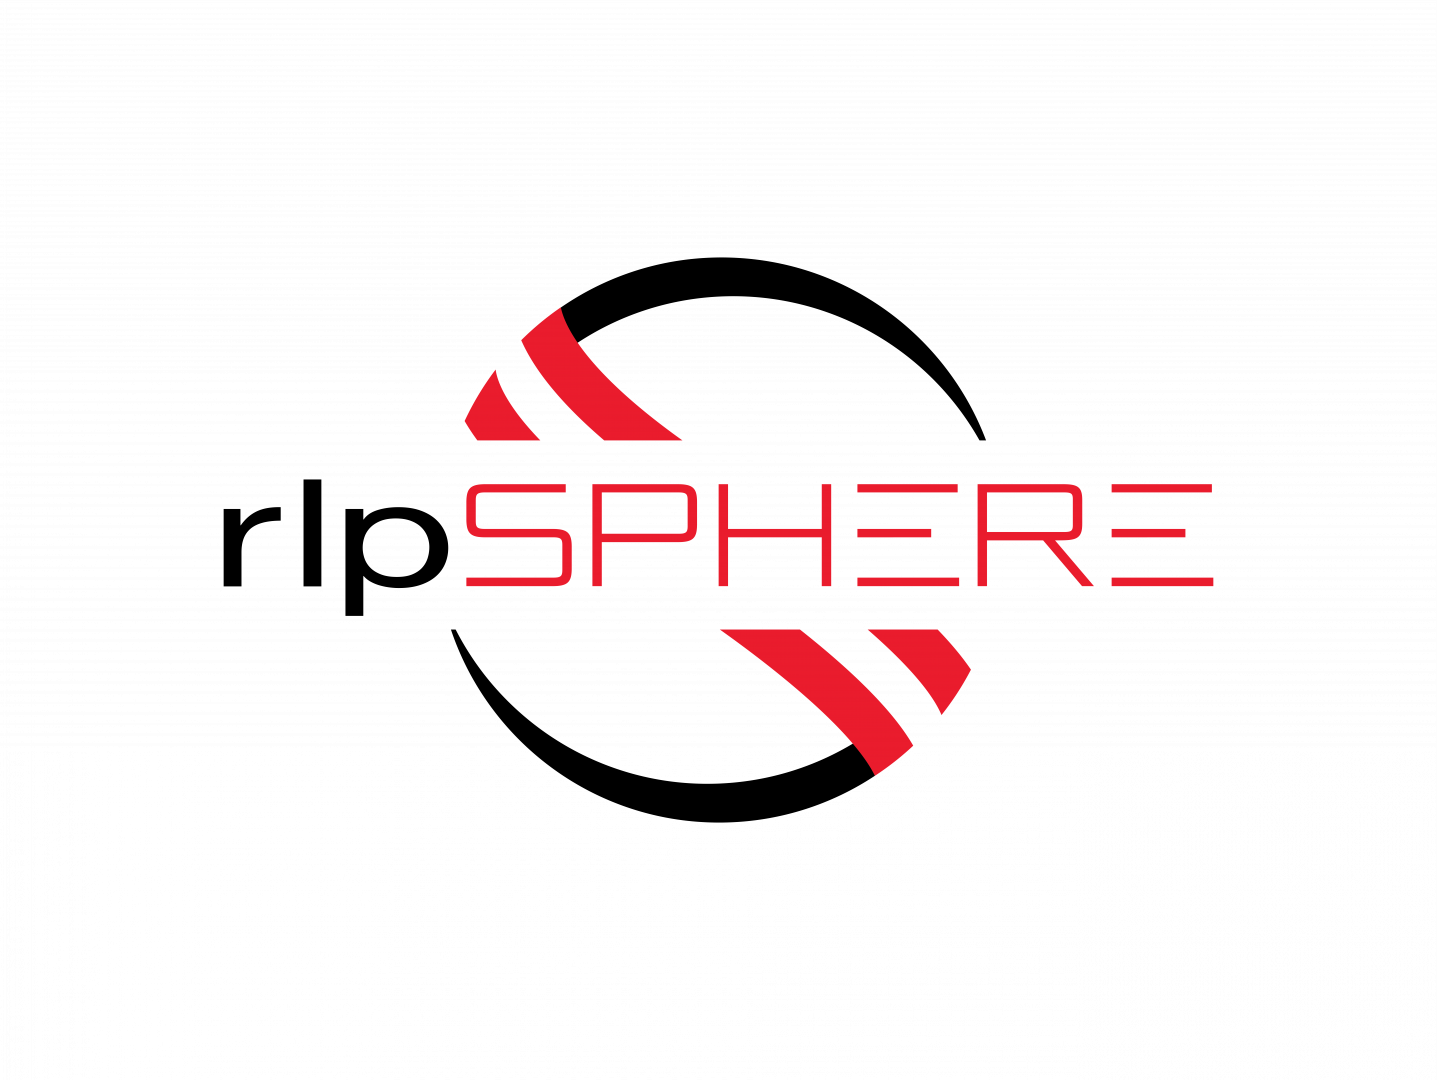 rlpSPHERE is here!